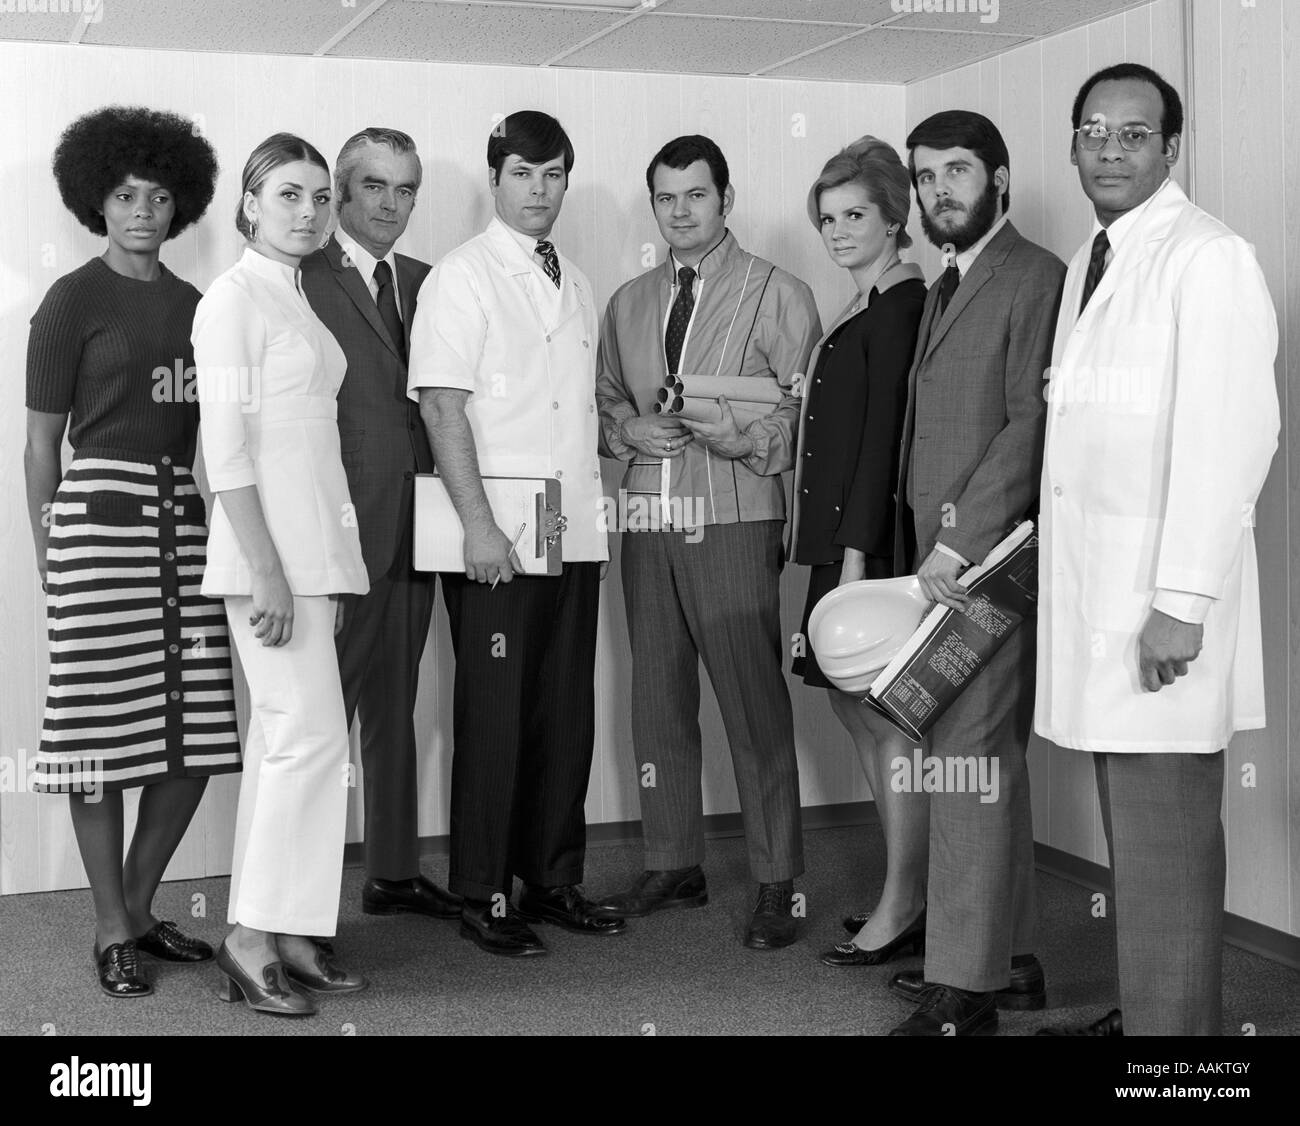 1970s MULTI-ETHNIC LINE-UP OF MEN & WOMEN OF VARIOUS PROFESSIONS WITH SERIOUS EXPRESSIONS Stock Photo